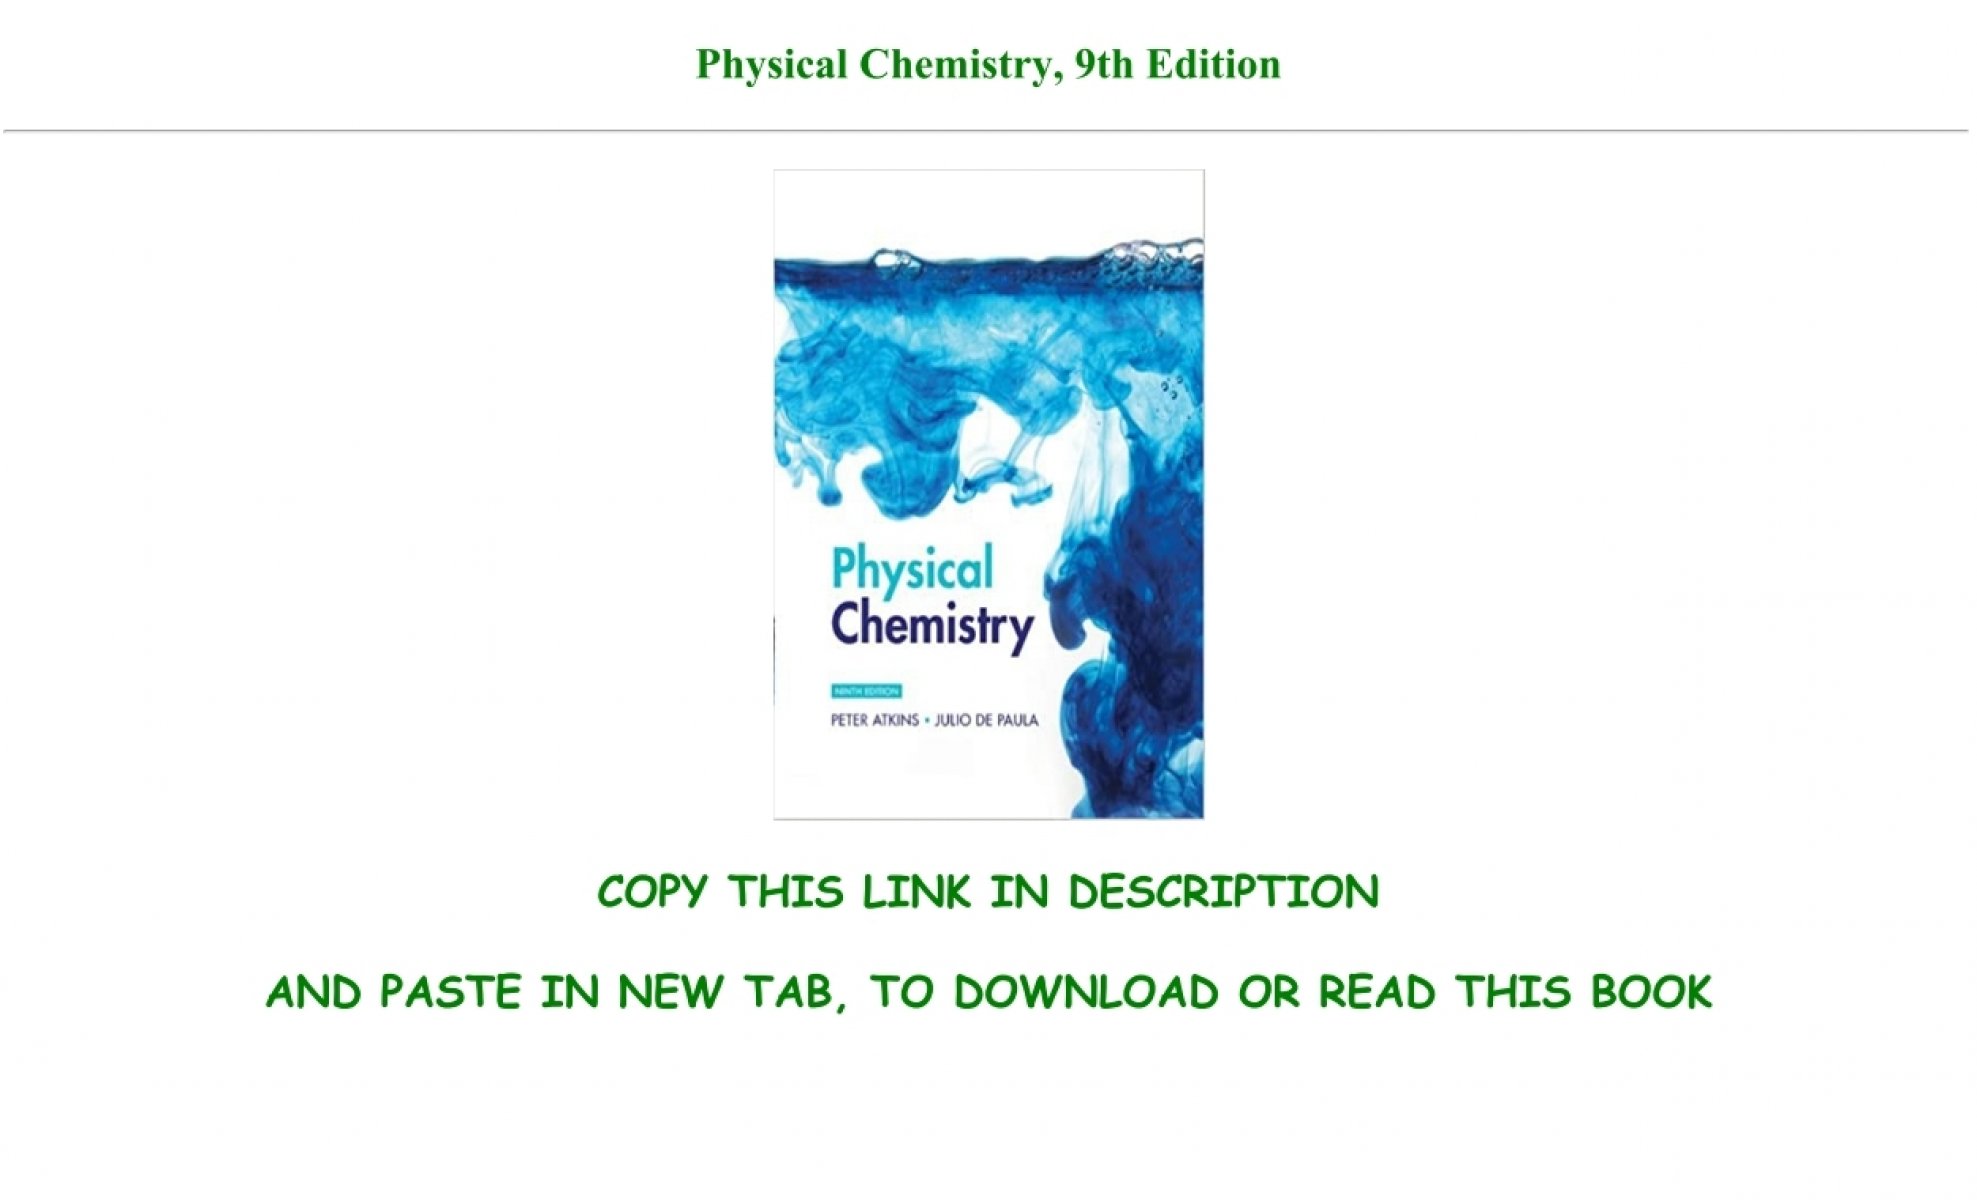 experiments in physical chemistry 9th edition